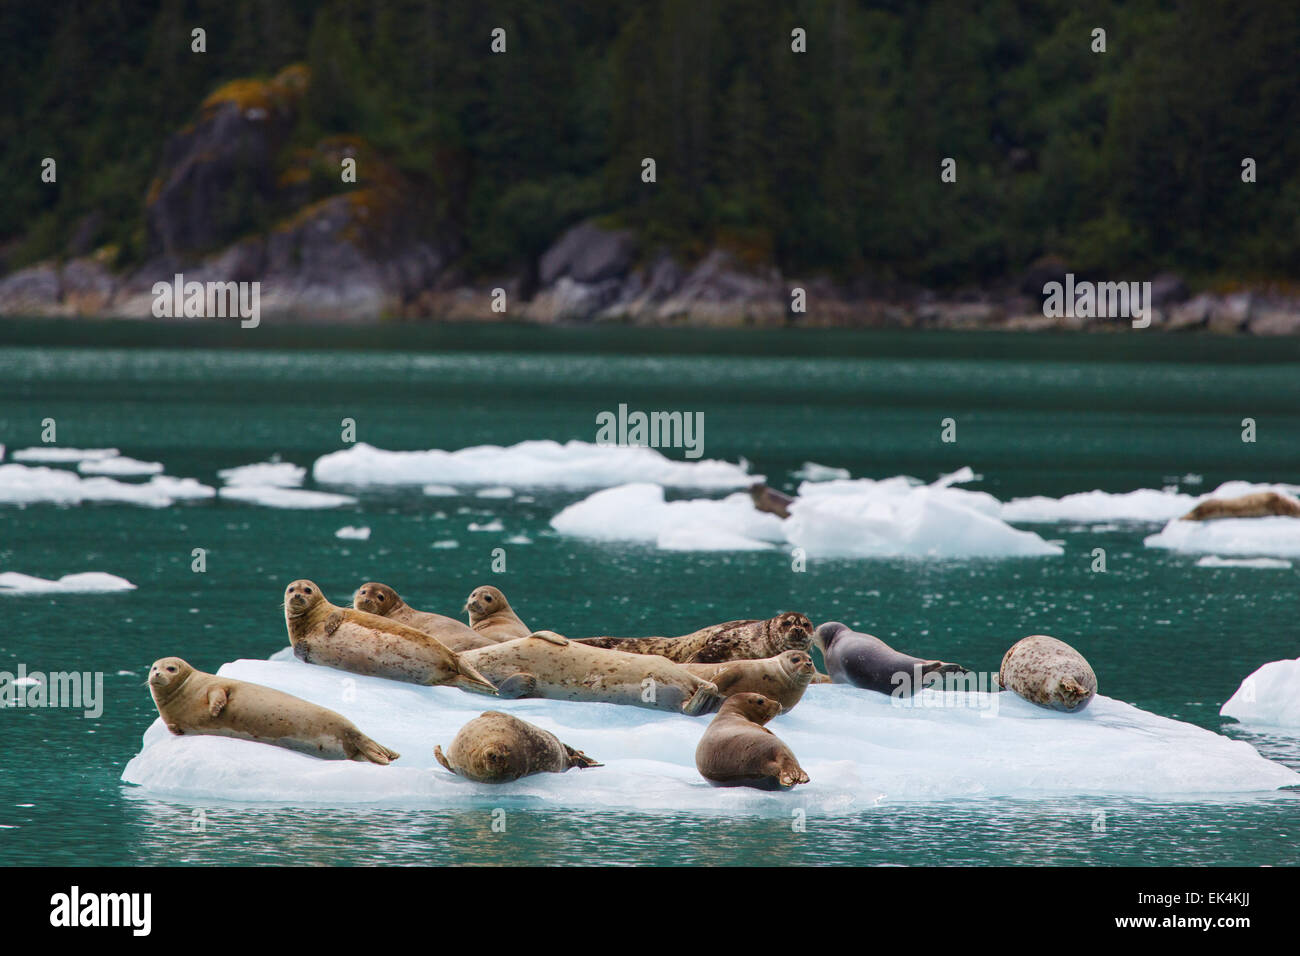 Seehunde auf Eisbergen in Le Conte Bay, Tongass National Forest, Alaska. Stockfoto